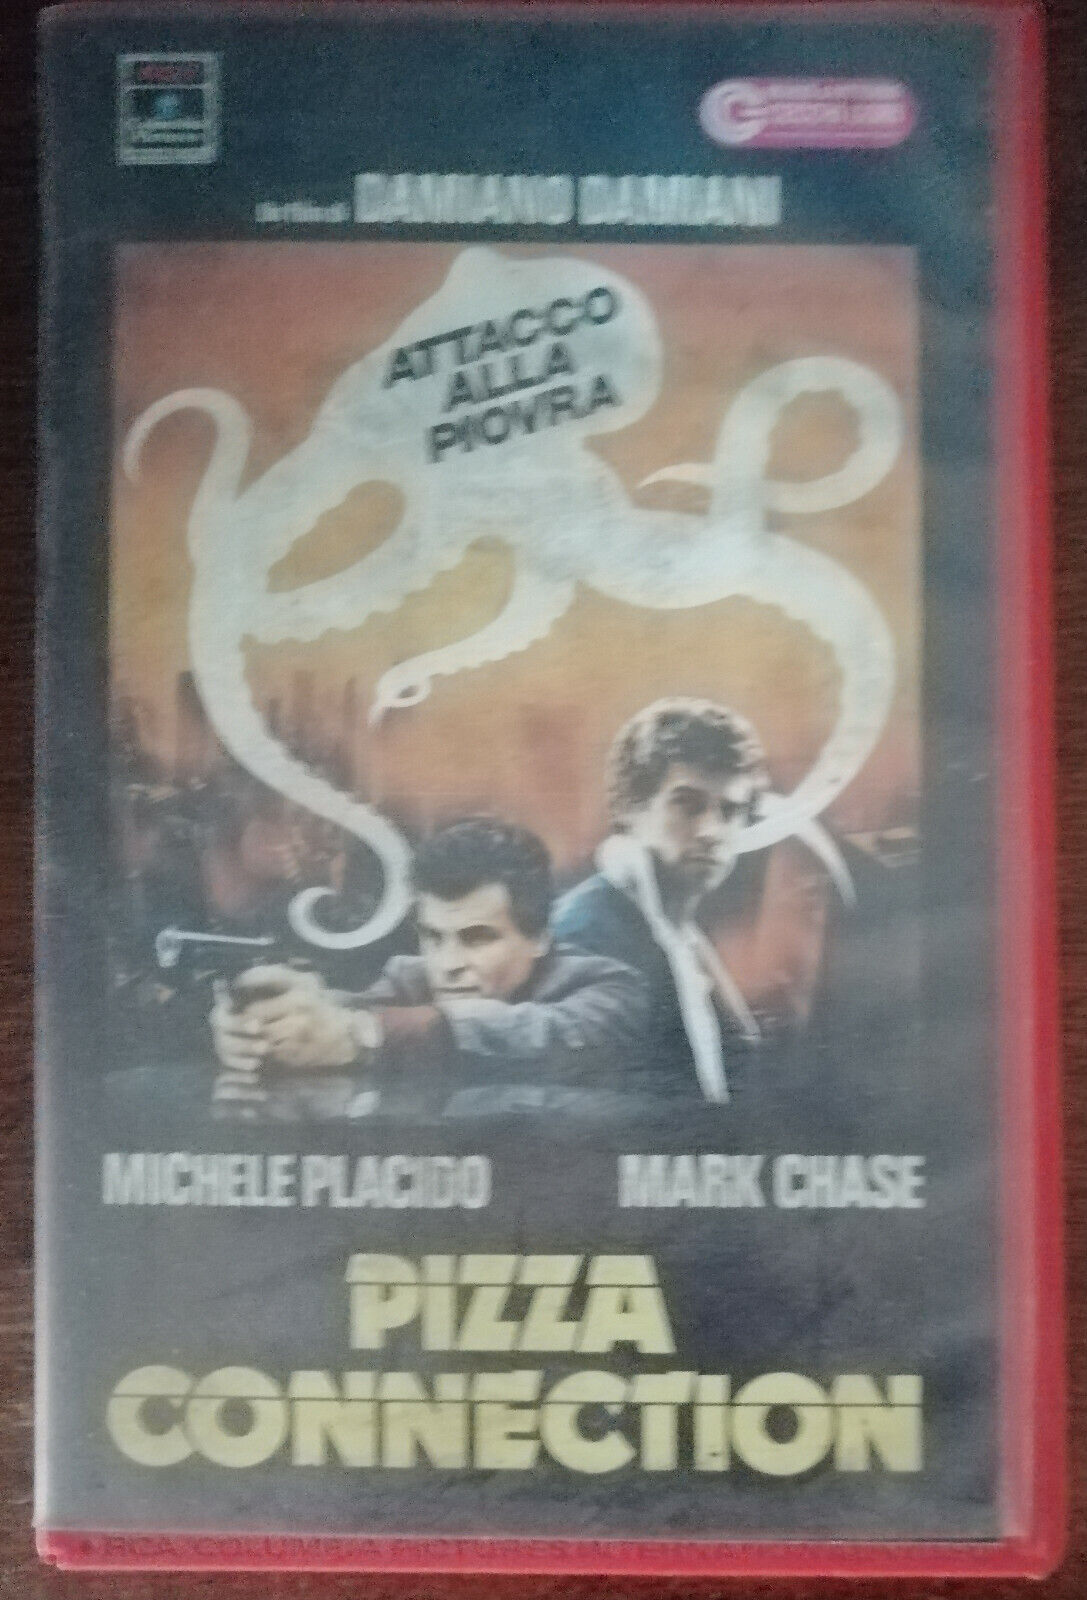 Pizza connection - Damiano Damiani - Silver Film,1985 - VHS - A vhs usato